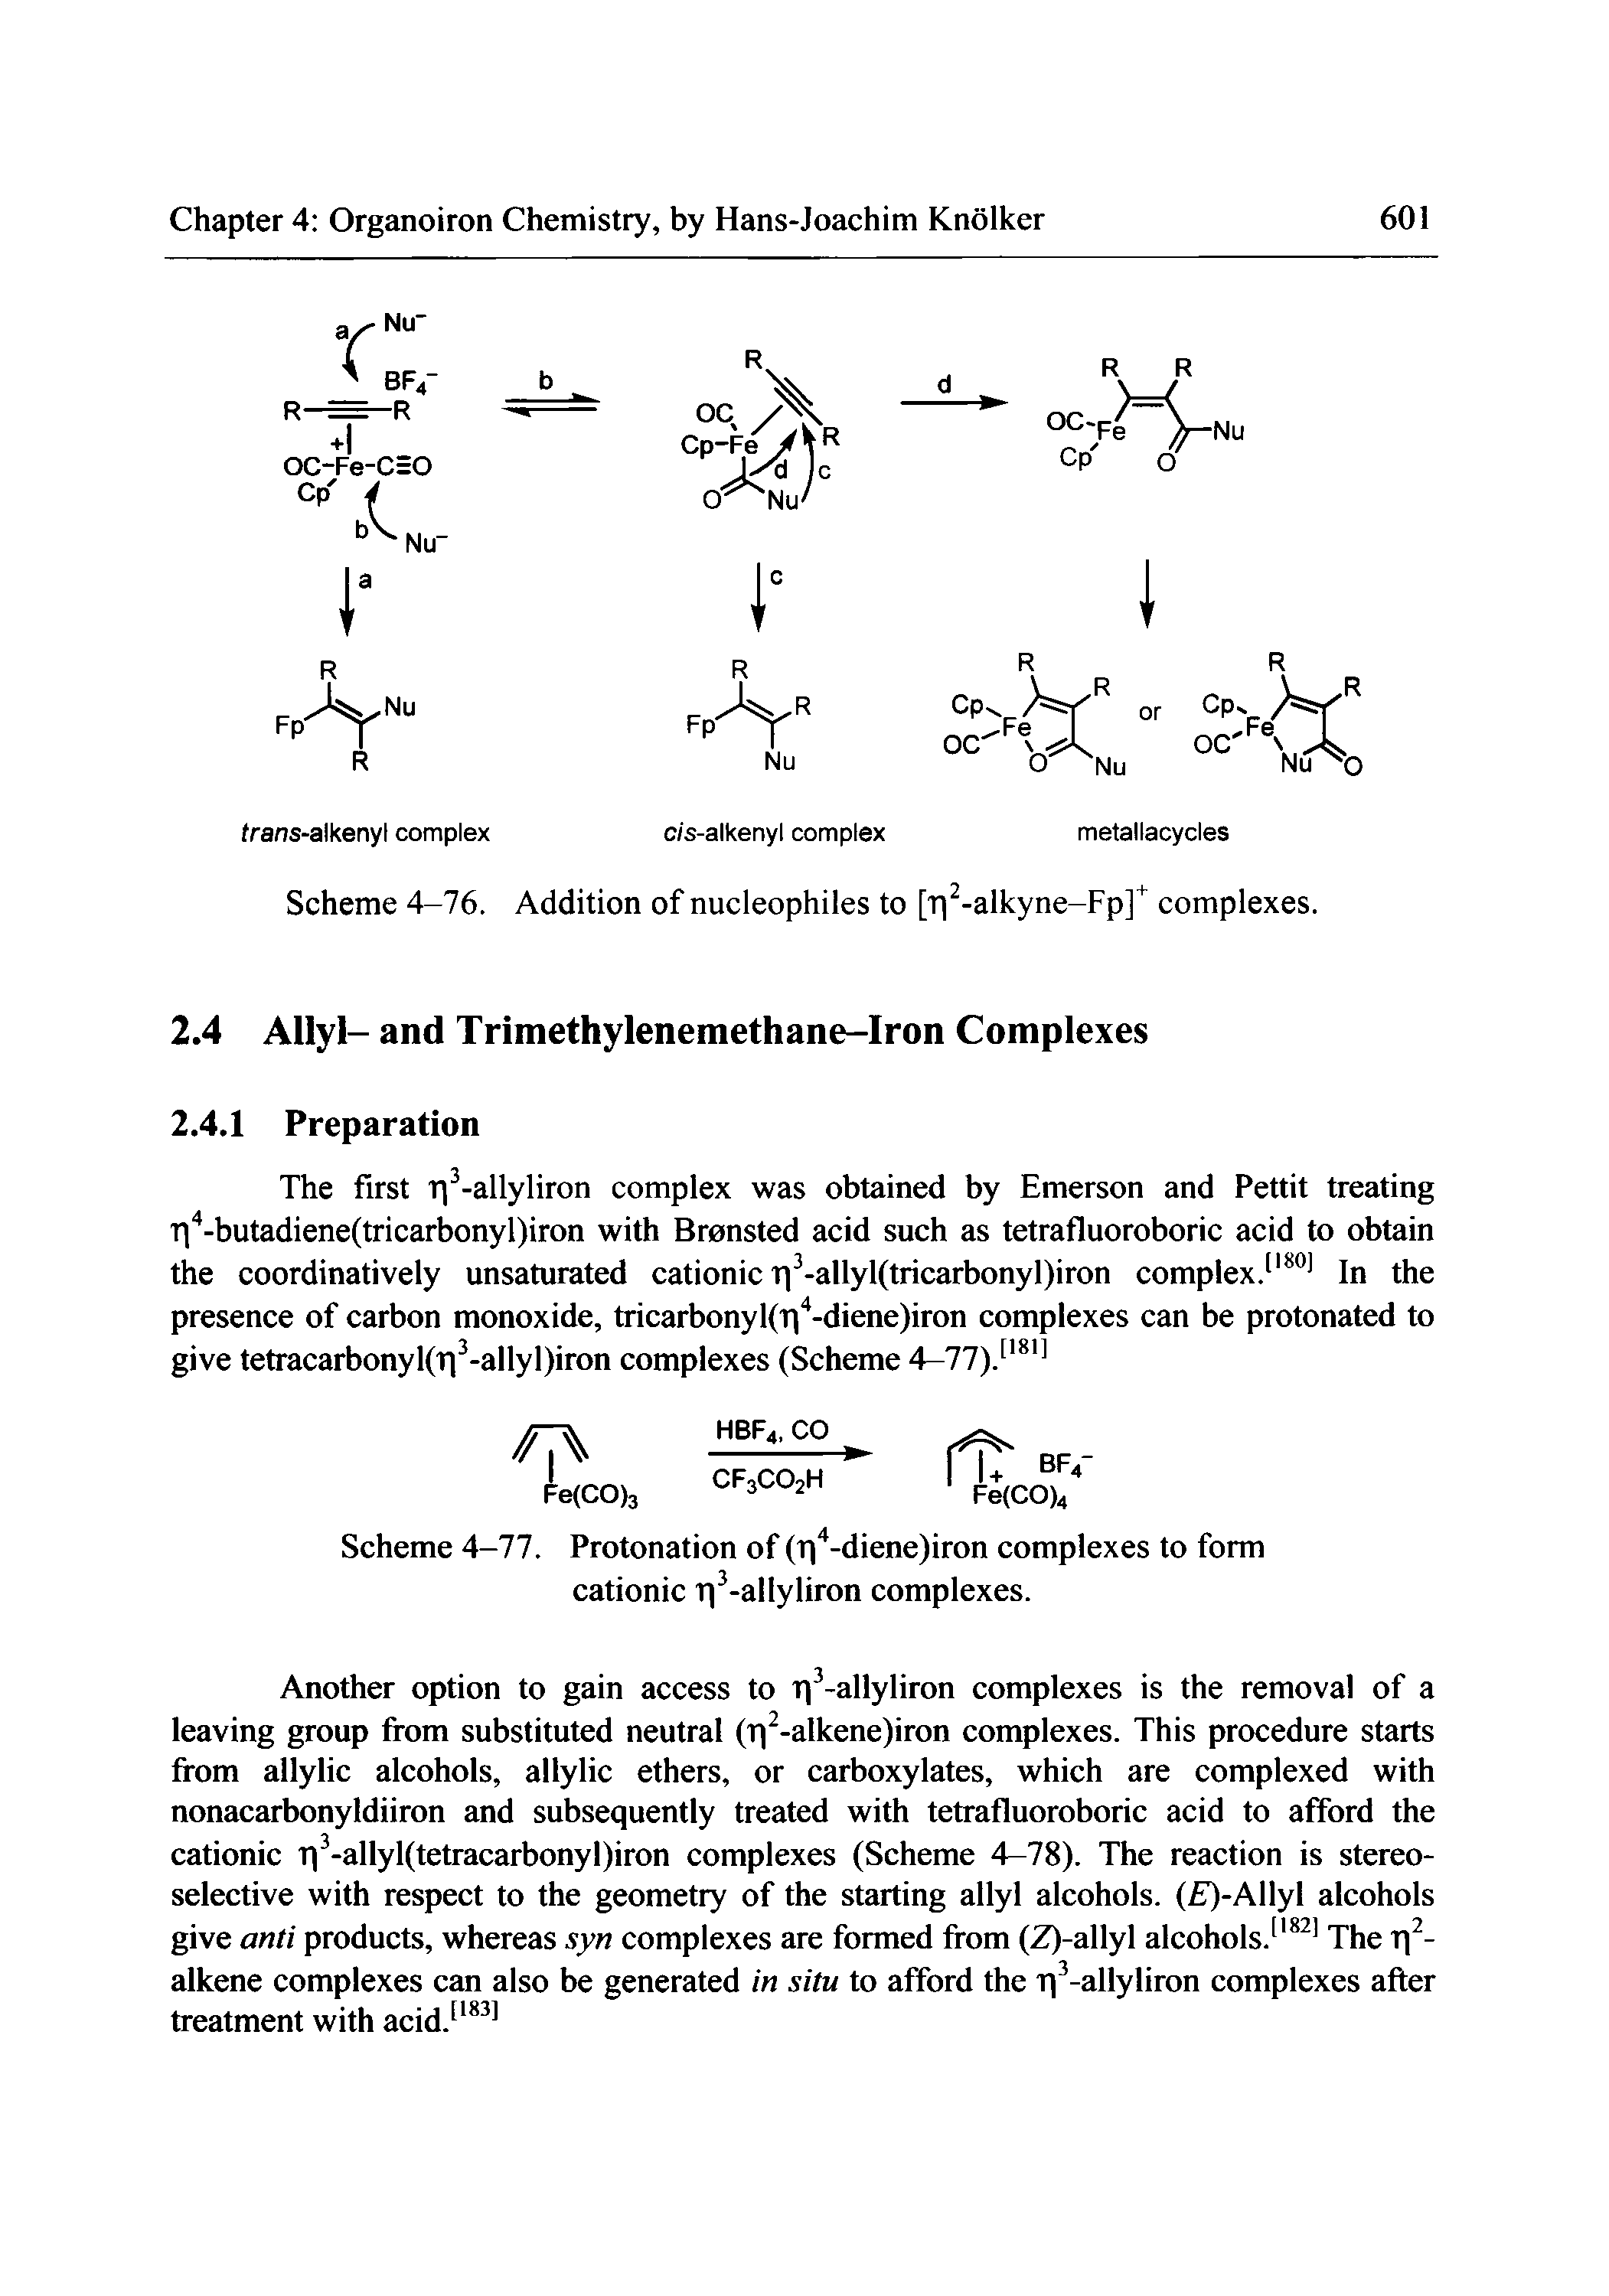 Scheme 4-77. Protonation of (T -diene)iron complexes to form cationic Ti -allyliron complexes.